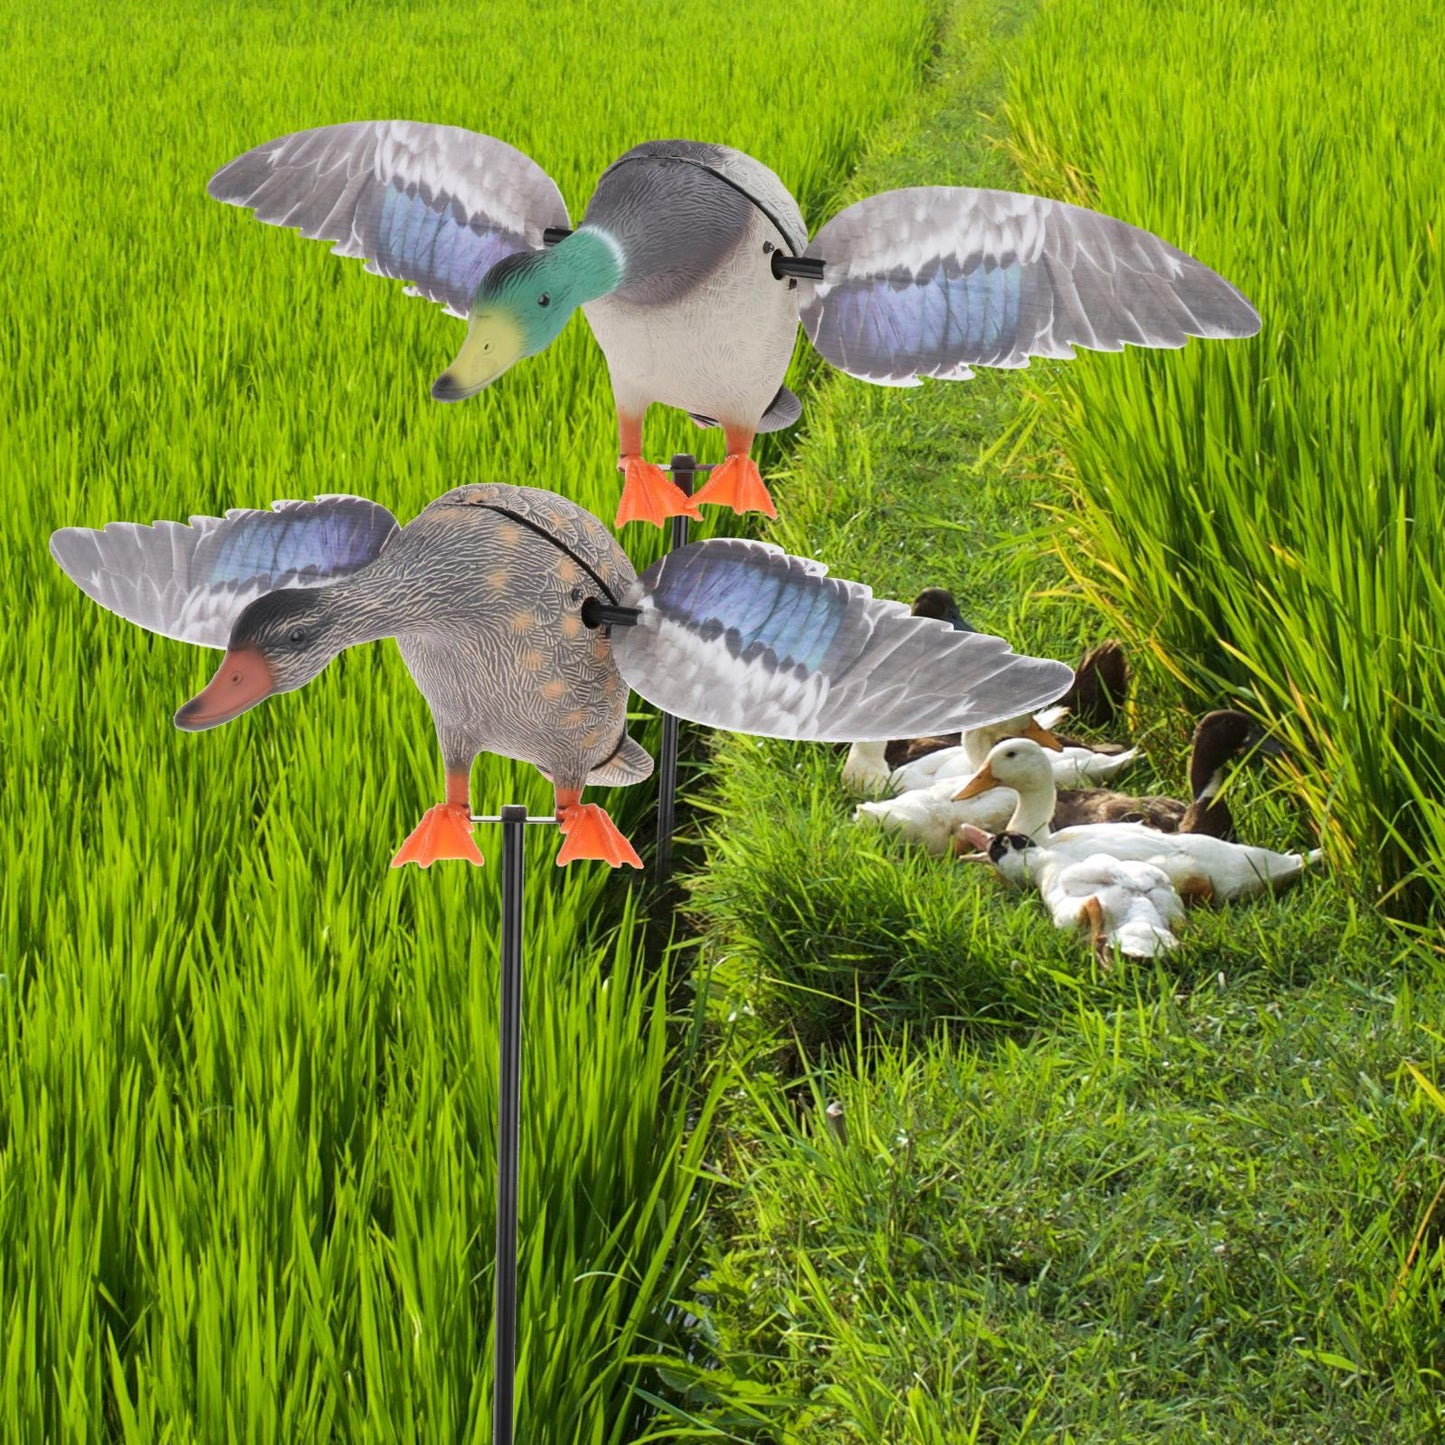 Electric Flying Duck Decoy Mallard Drake Flapping Wing Motion Motorized Duck Decoy Garden Pond Decor Lawn Ornaments for Hunting